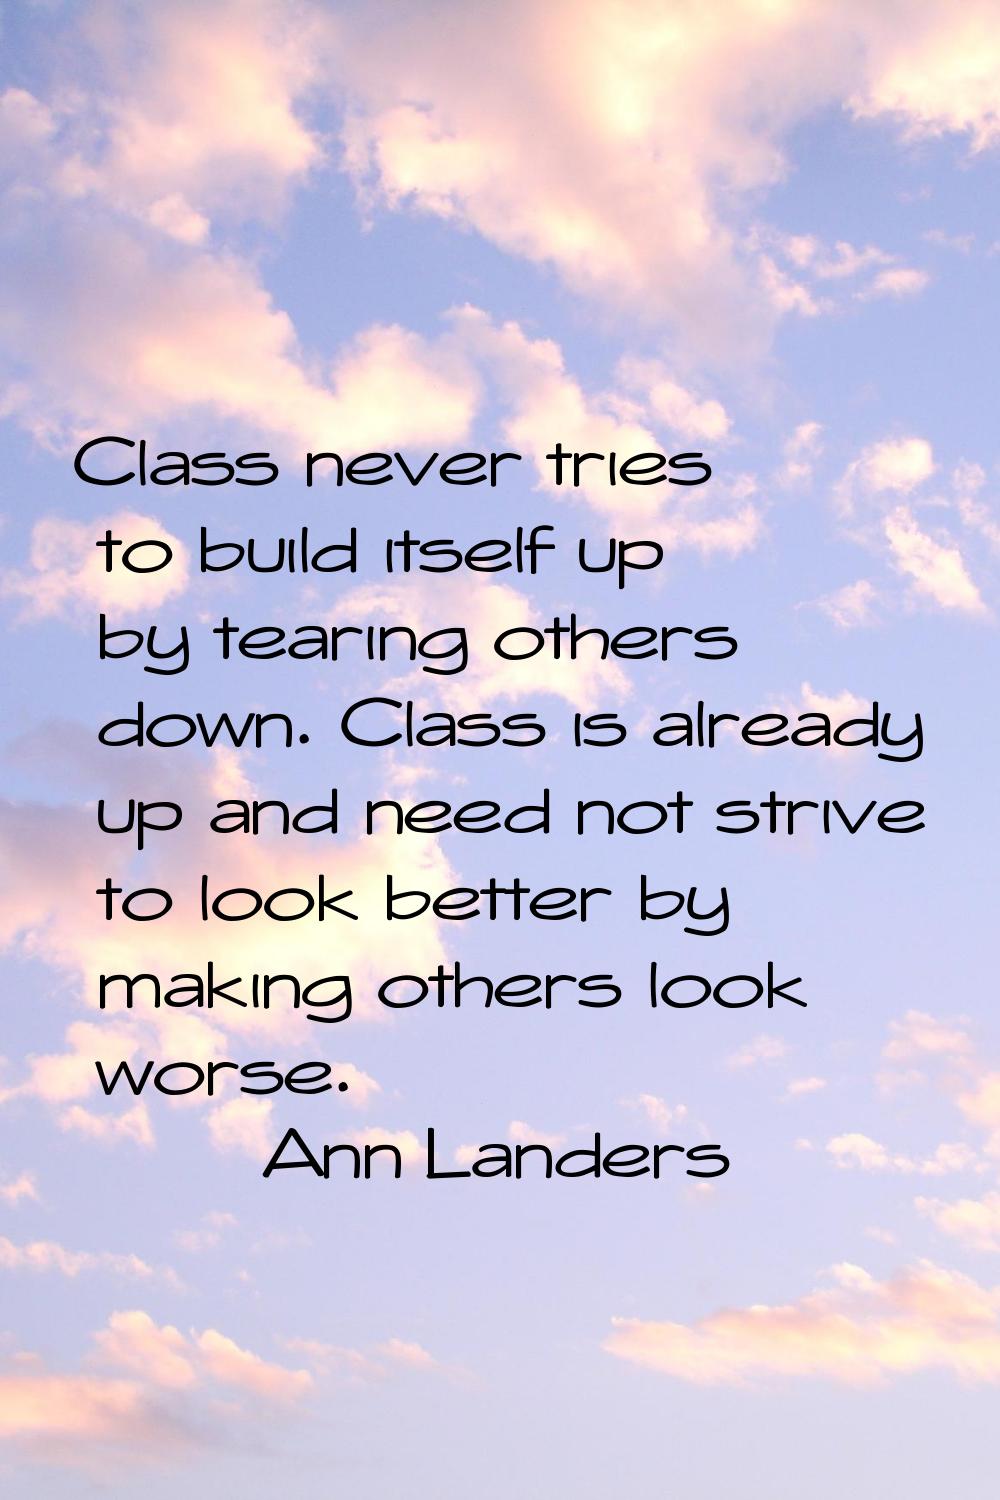 Class never tries to build itself up by tearing others down. Class is already up and need not striv